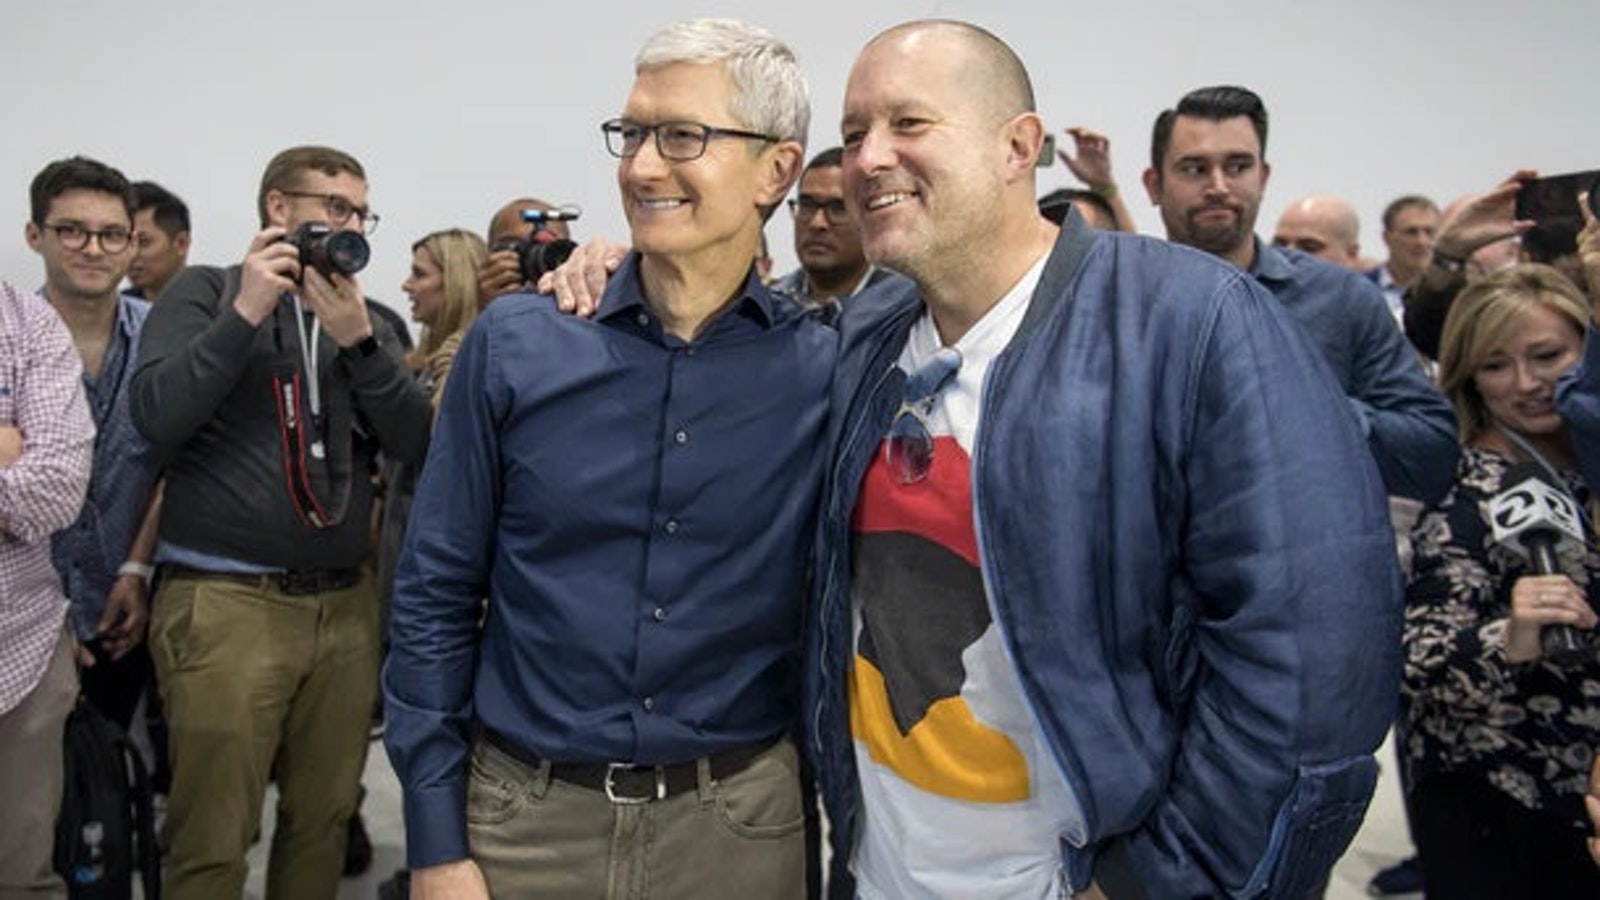 Jony Ive started working for Airbnb